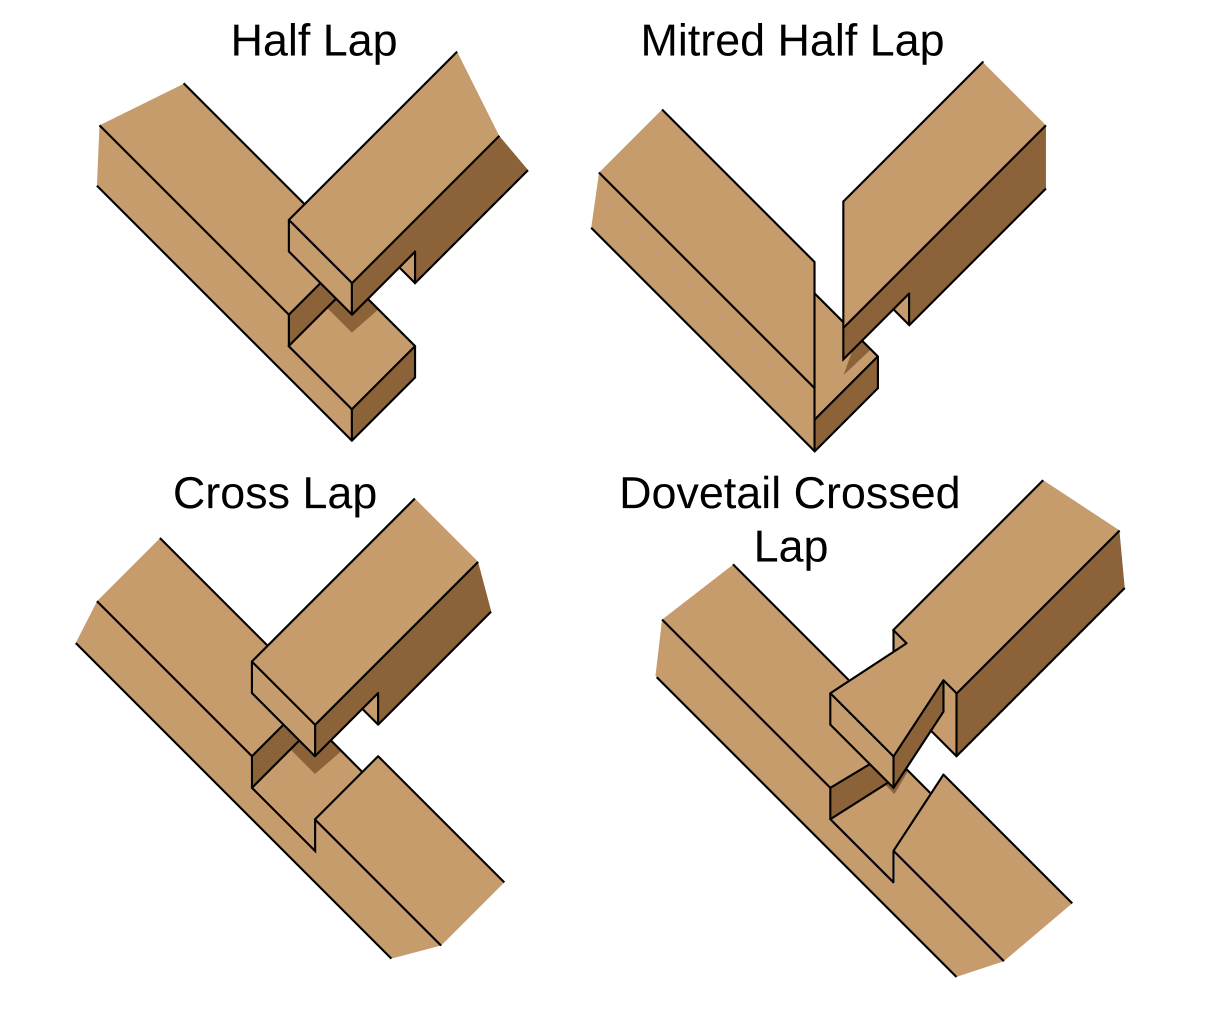 File:Woodworking lap joints.svg - Wikipedia